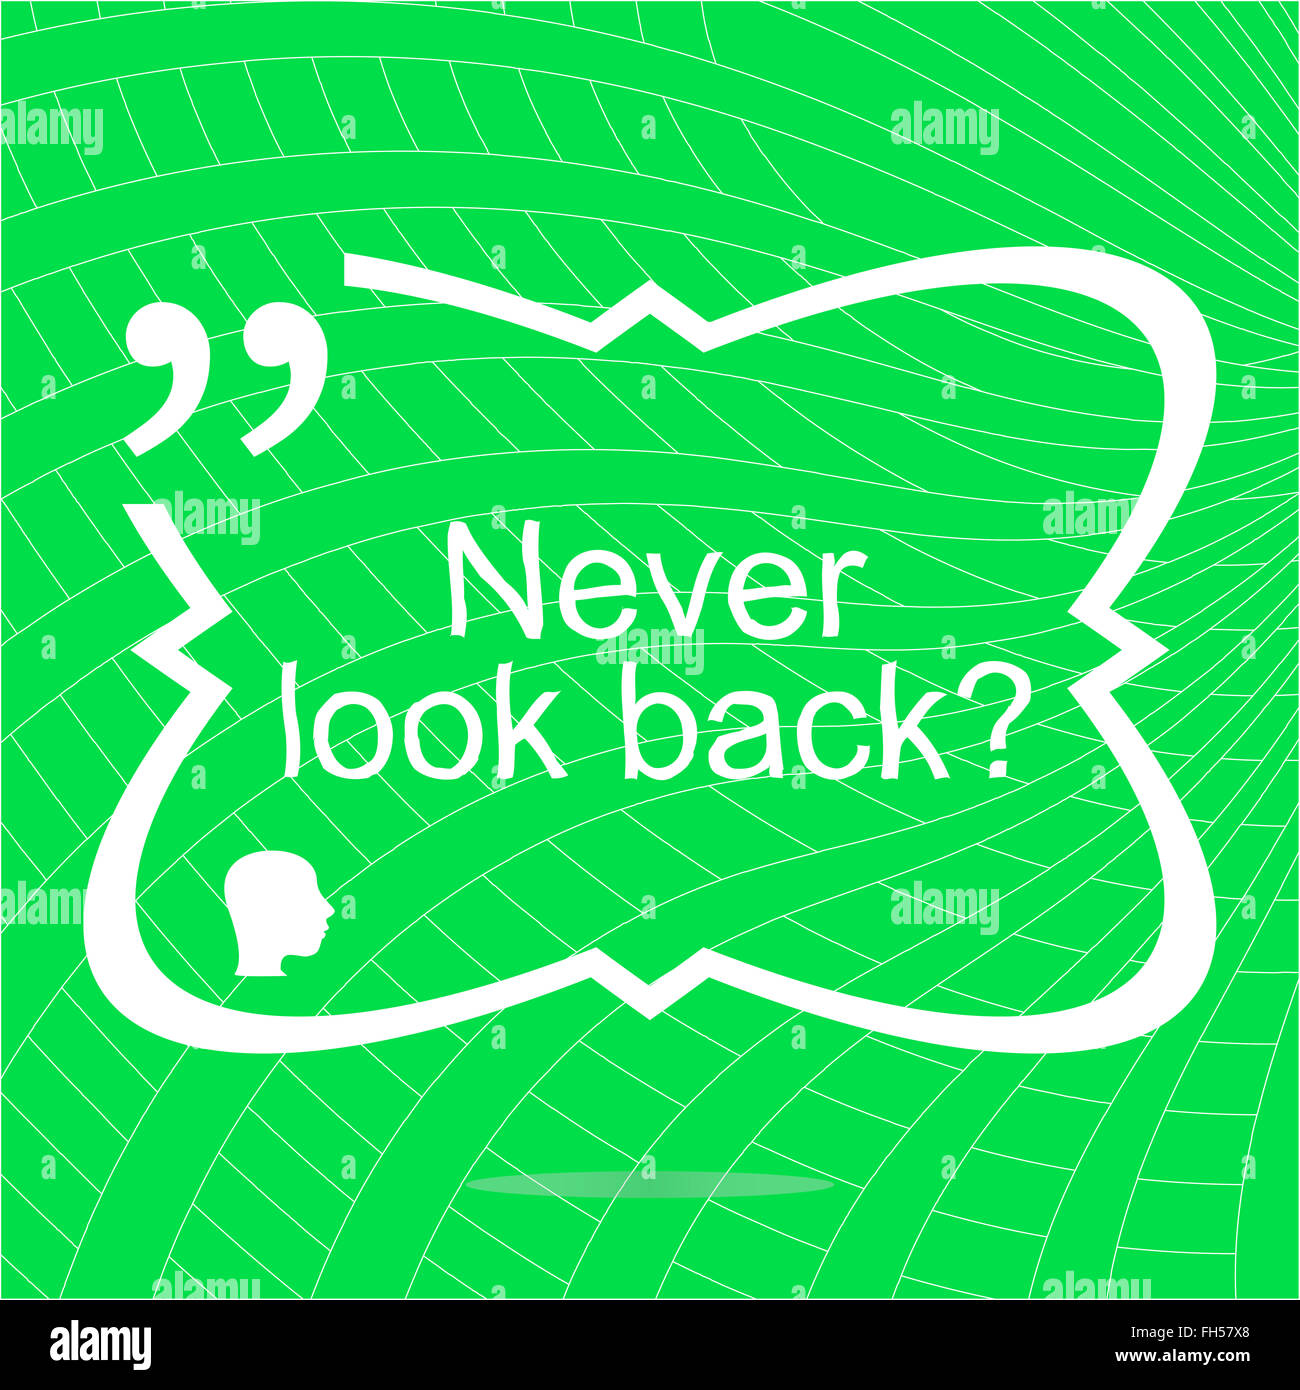 Never look back. Inspirational motivational quote. Simple trendy design. Positive quote. Vector illustration Stock Photo